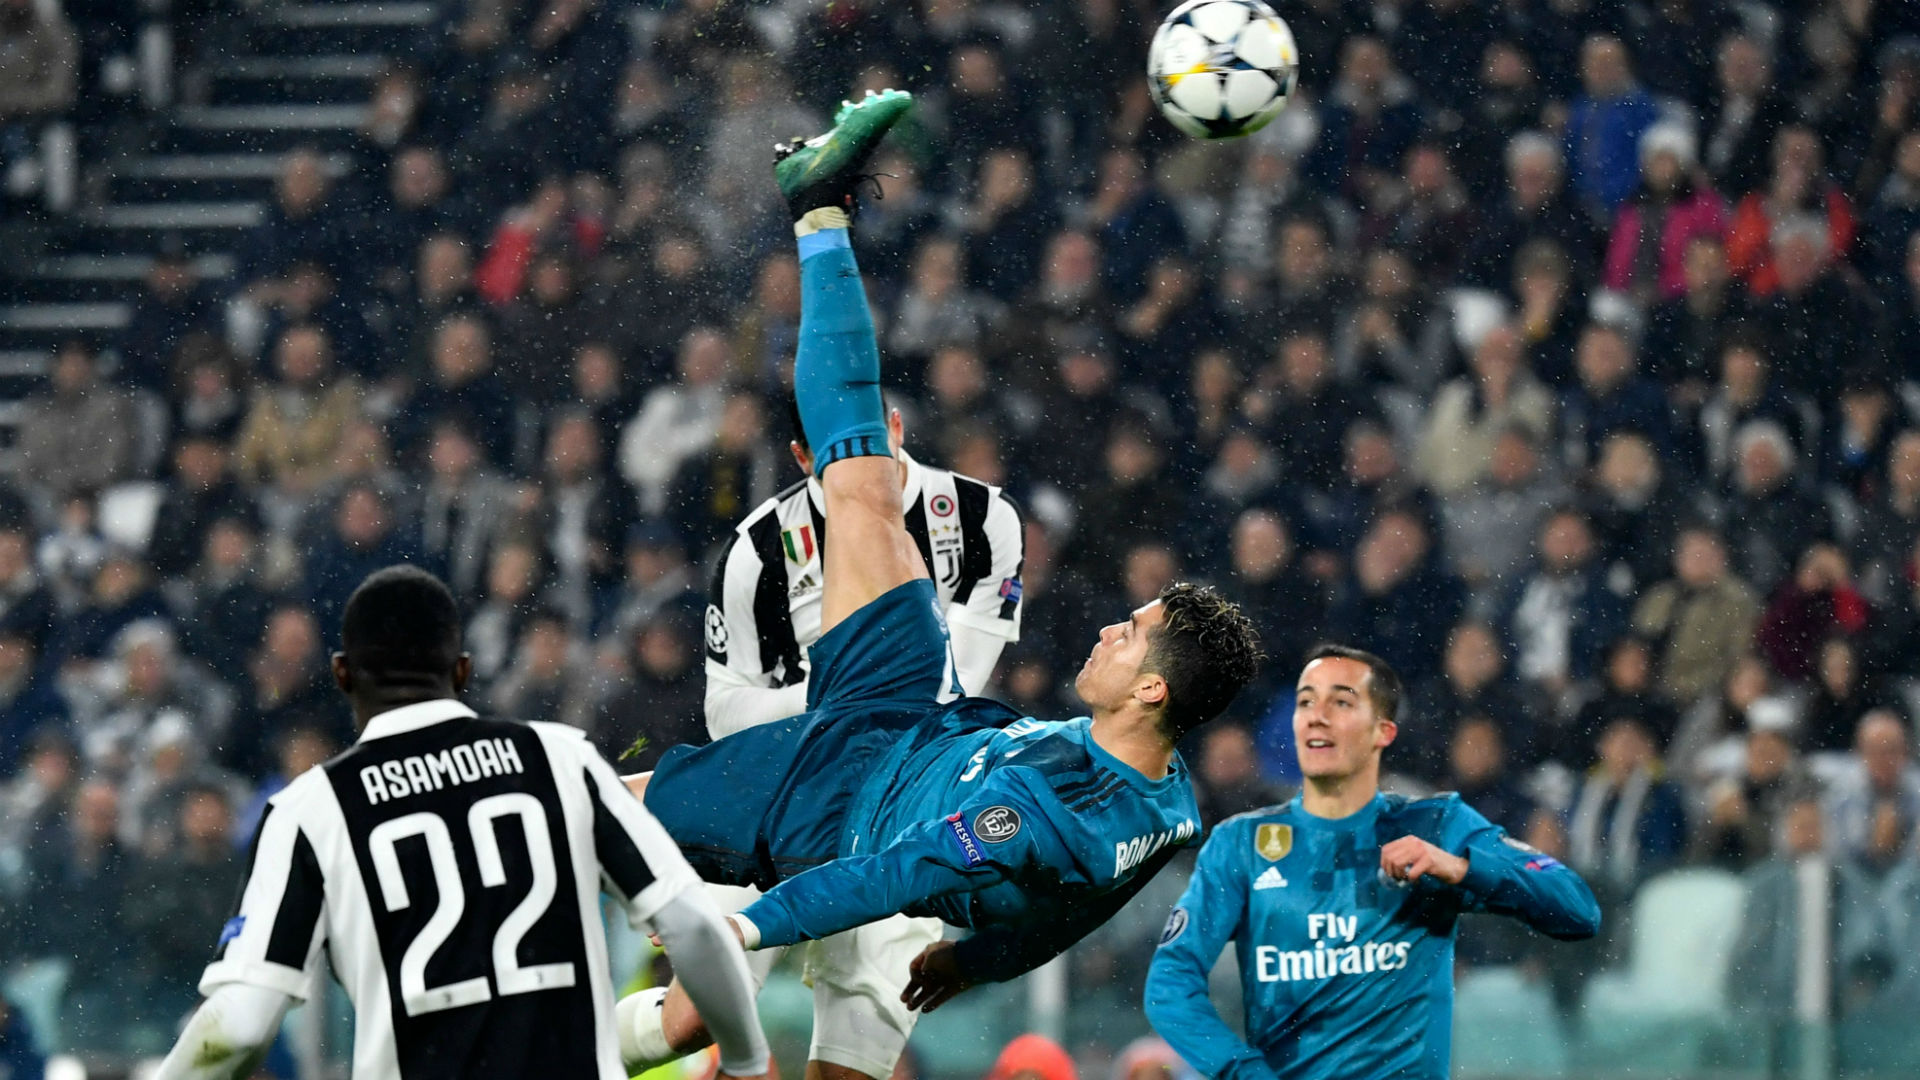 Record Breaking Cristiano Ronaldo Applauded  After ‘Most Beautiful Goal’